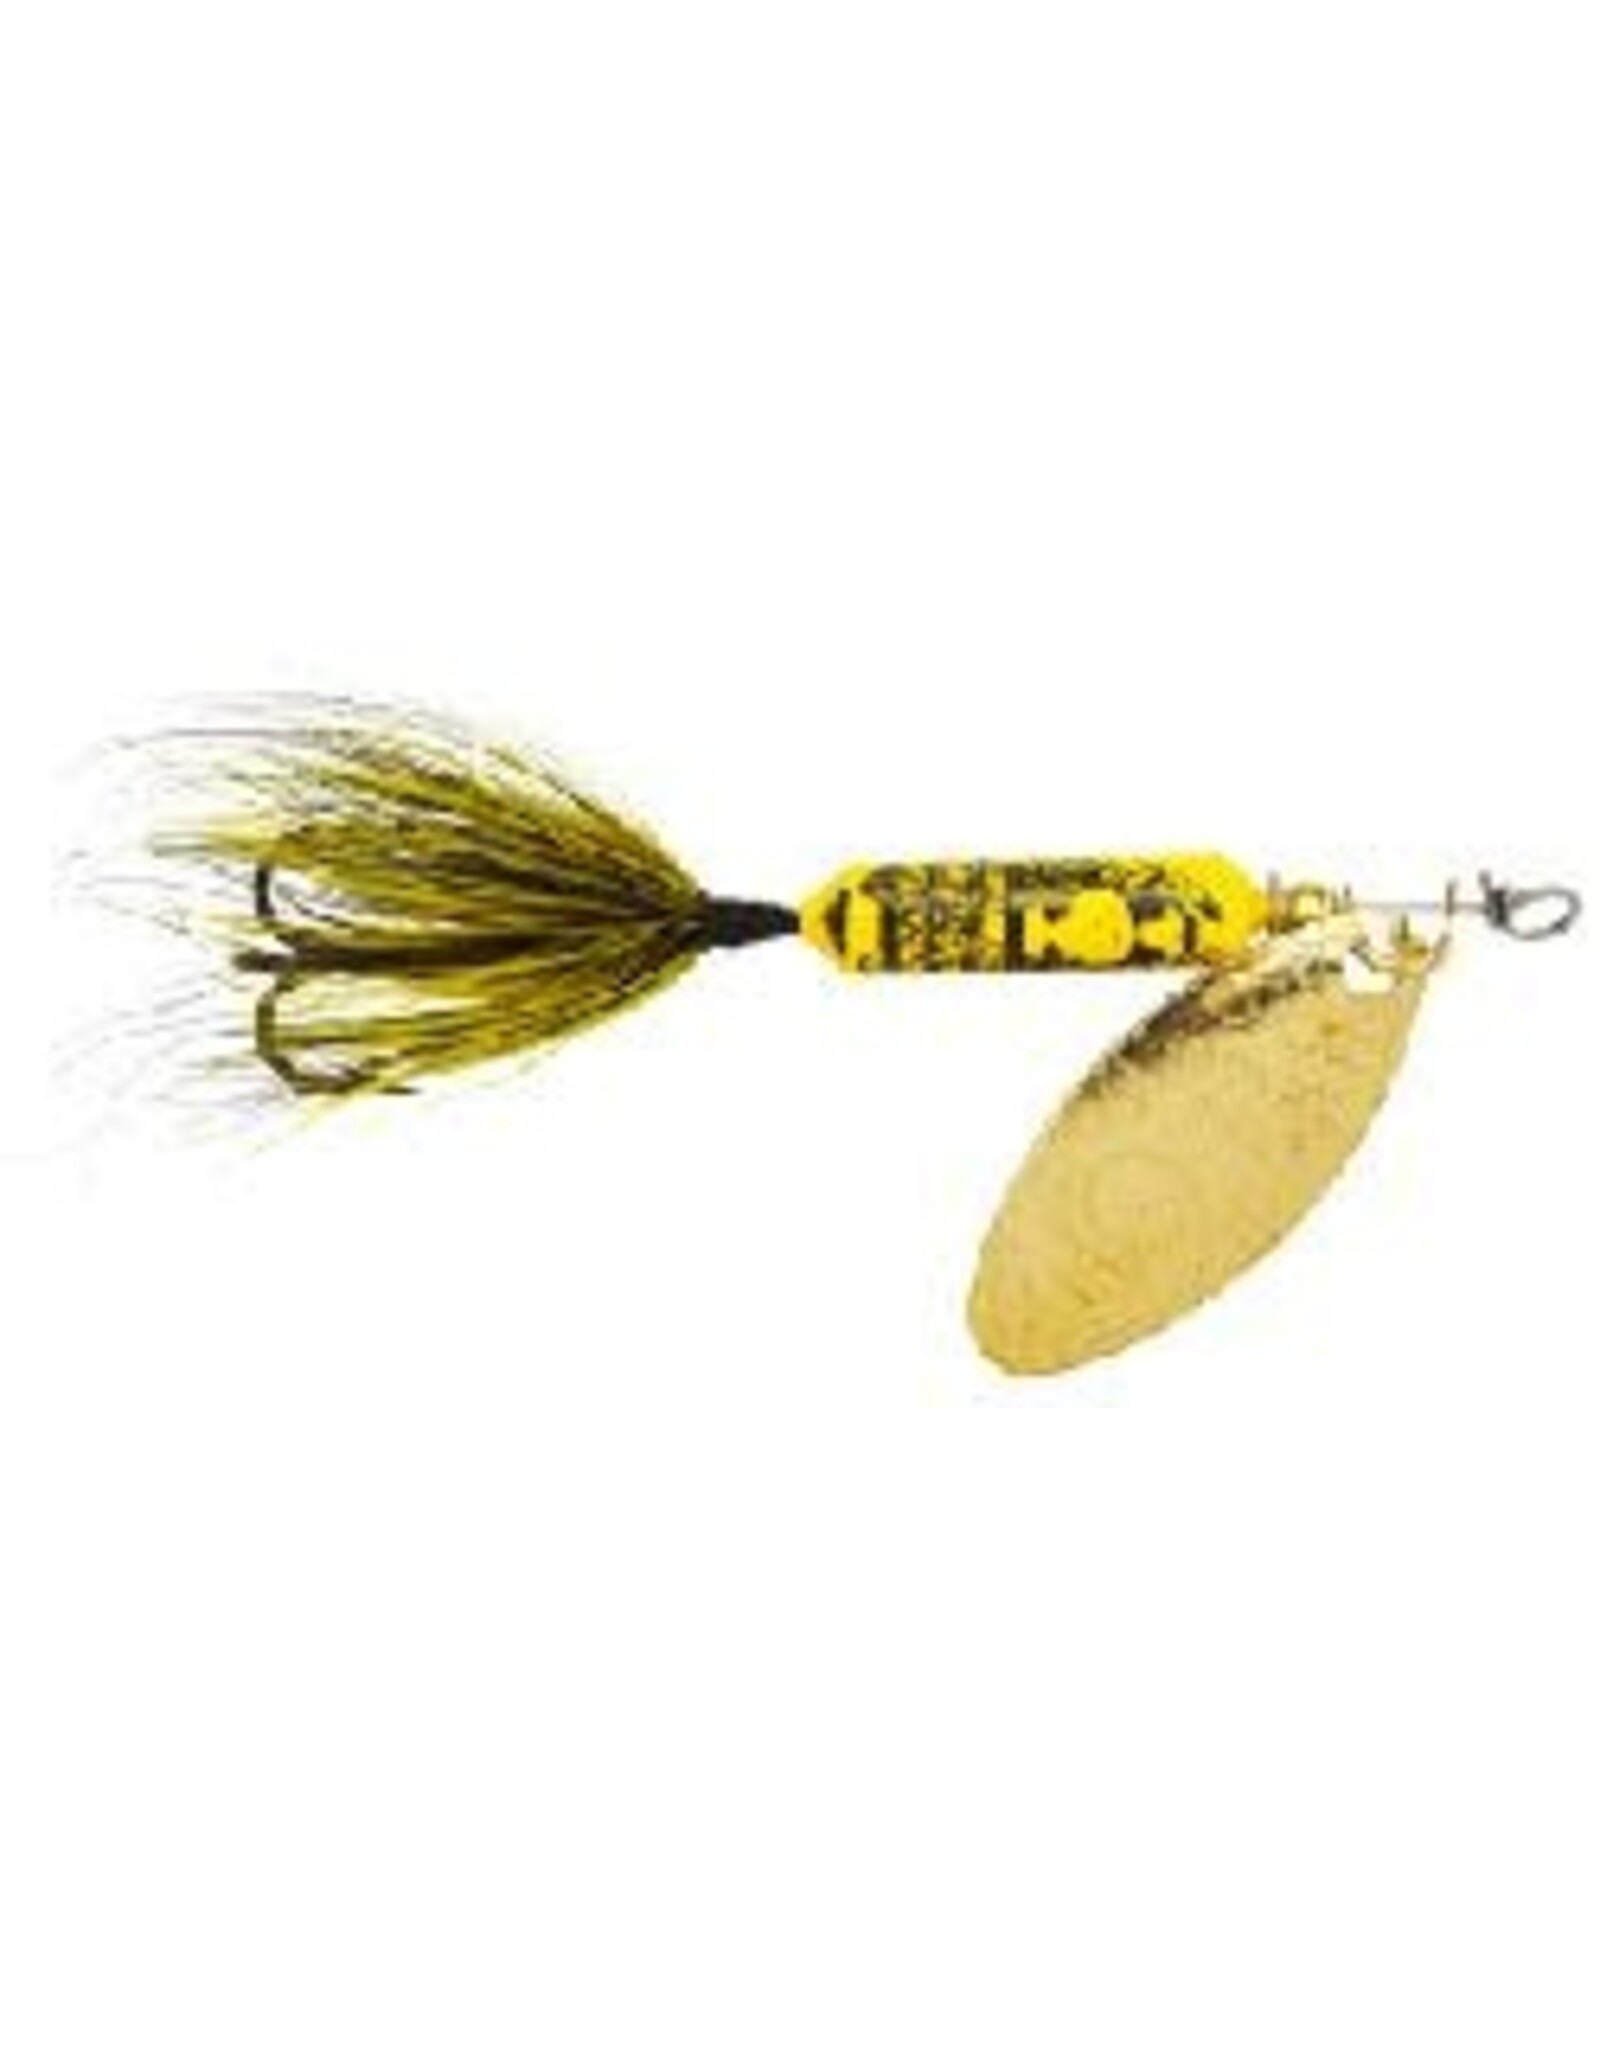 Worden's Rooster Tail - 2.25"  1/8 Oz - Bumble Bee